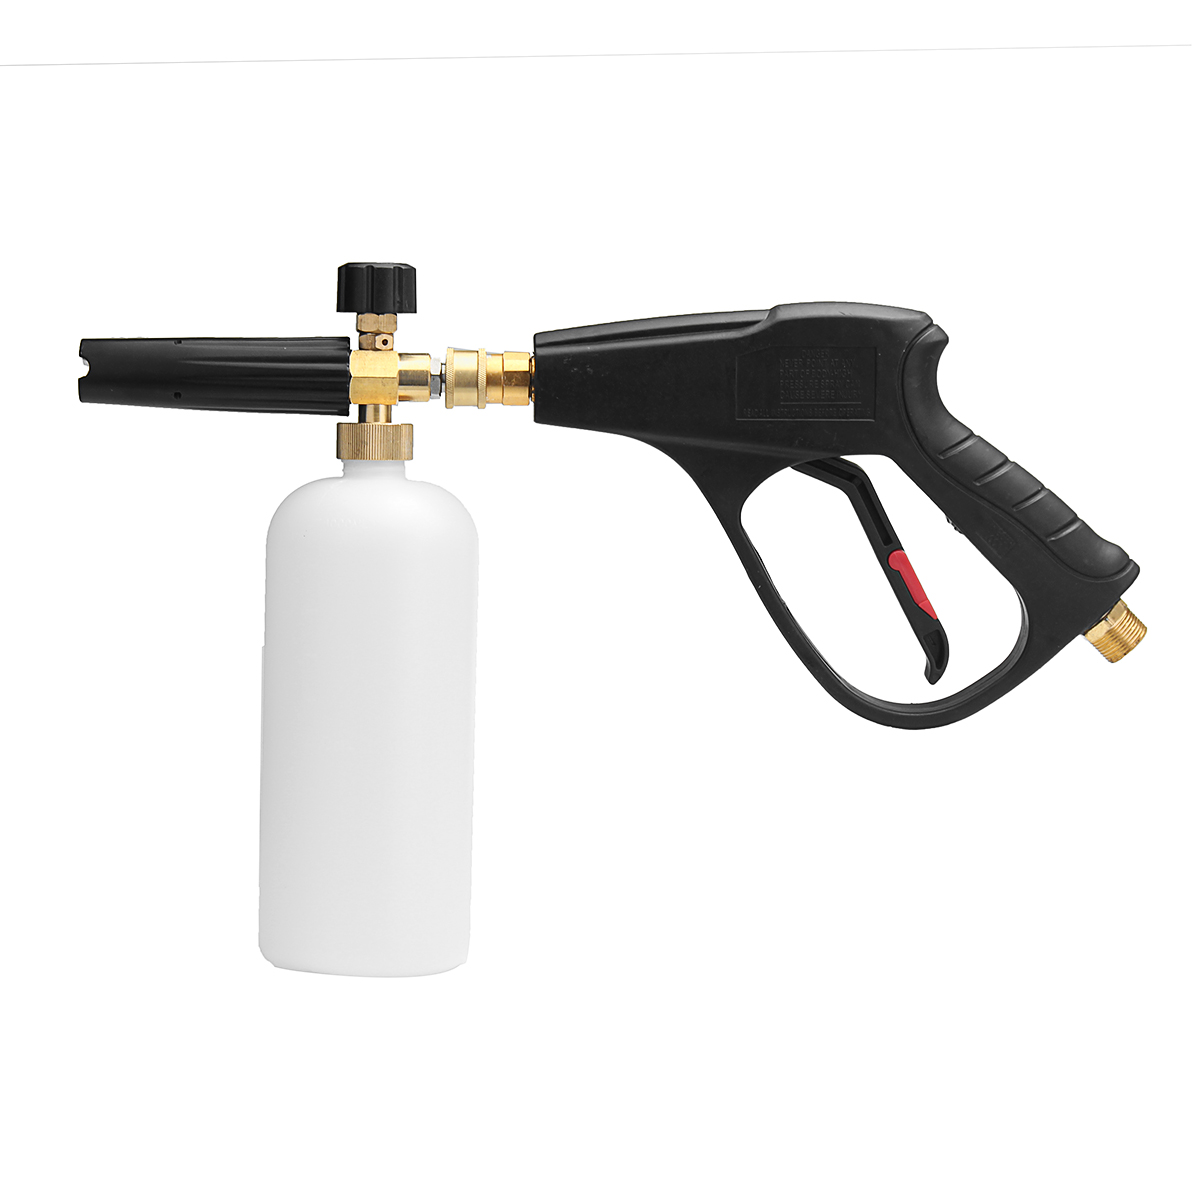 High-Pressure-Washer-Jet-14quot-Snow-Foam-Lance-Cannon-Car-Clean-Washer-Bottle-1374822-7